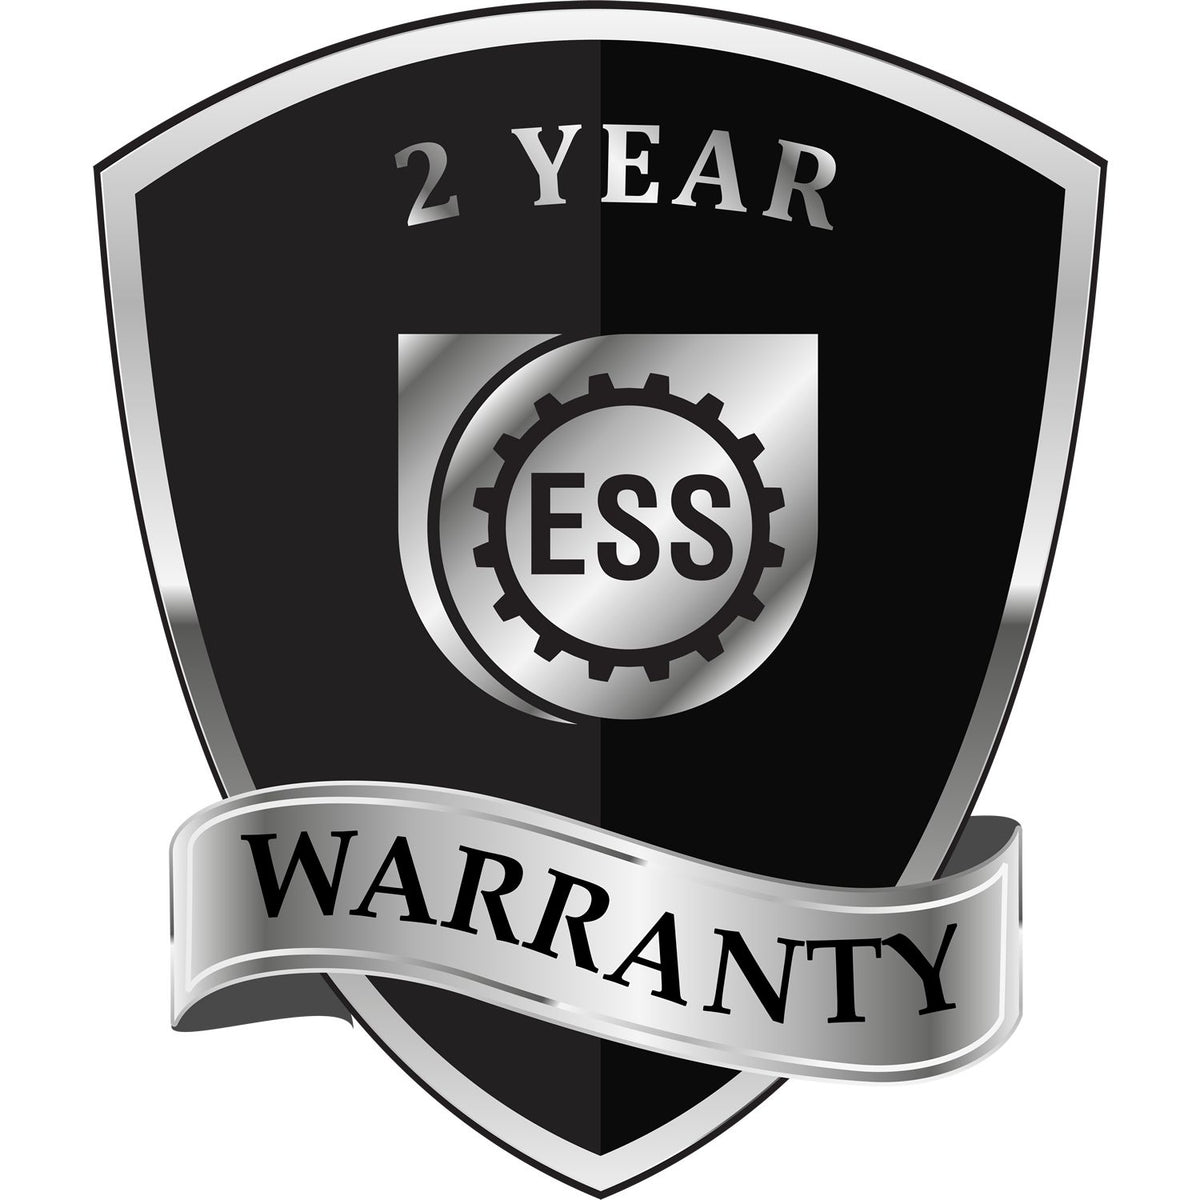 A black and silver badge or emblem showing warranty information for the Long Reach New Hampshire Geology Seal